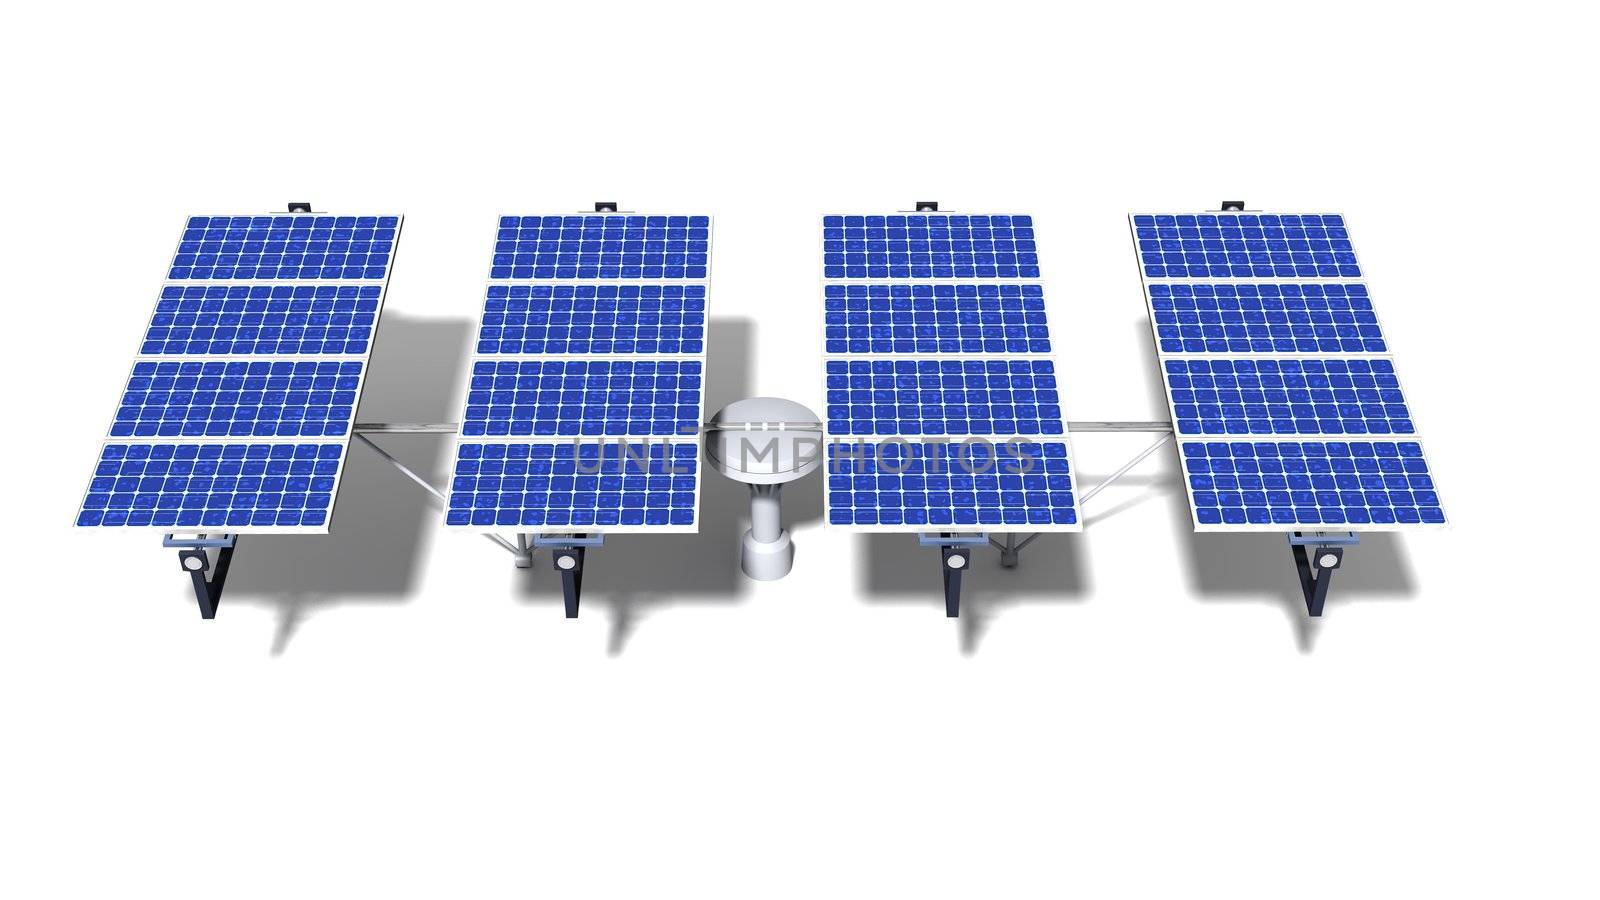 One articulated solar panel module at midday by shkyo30